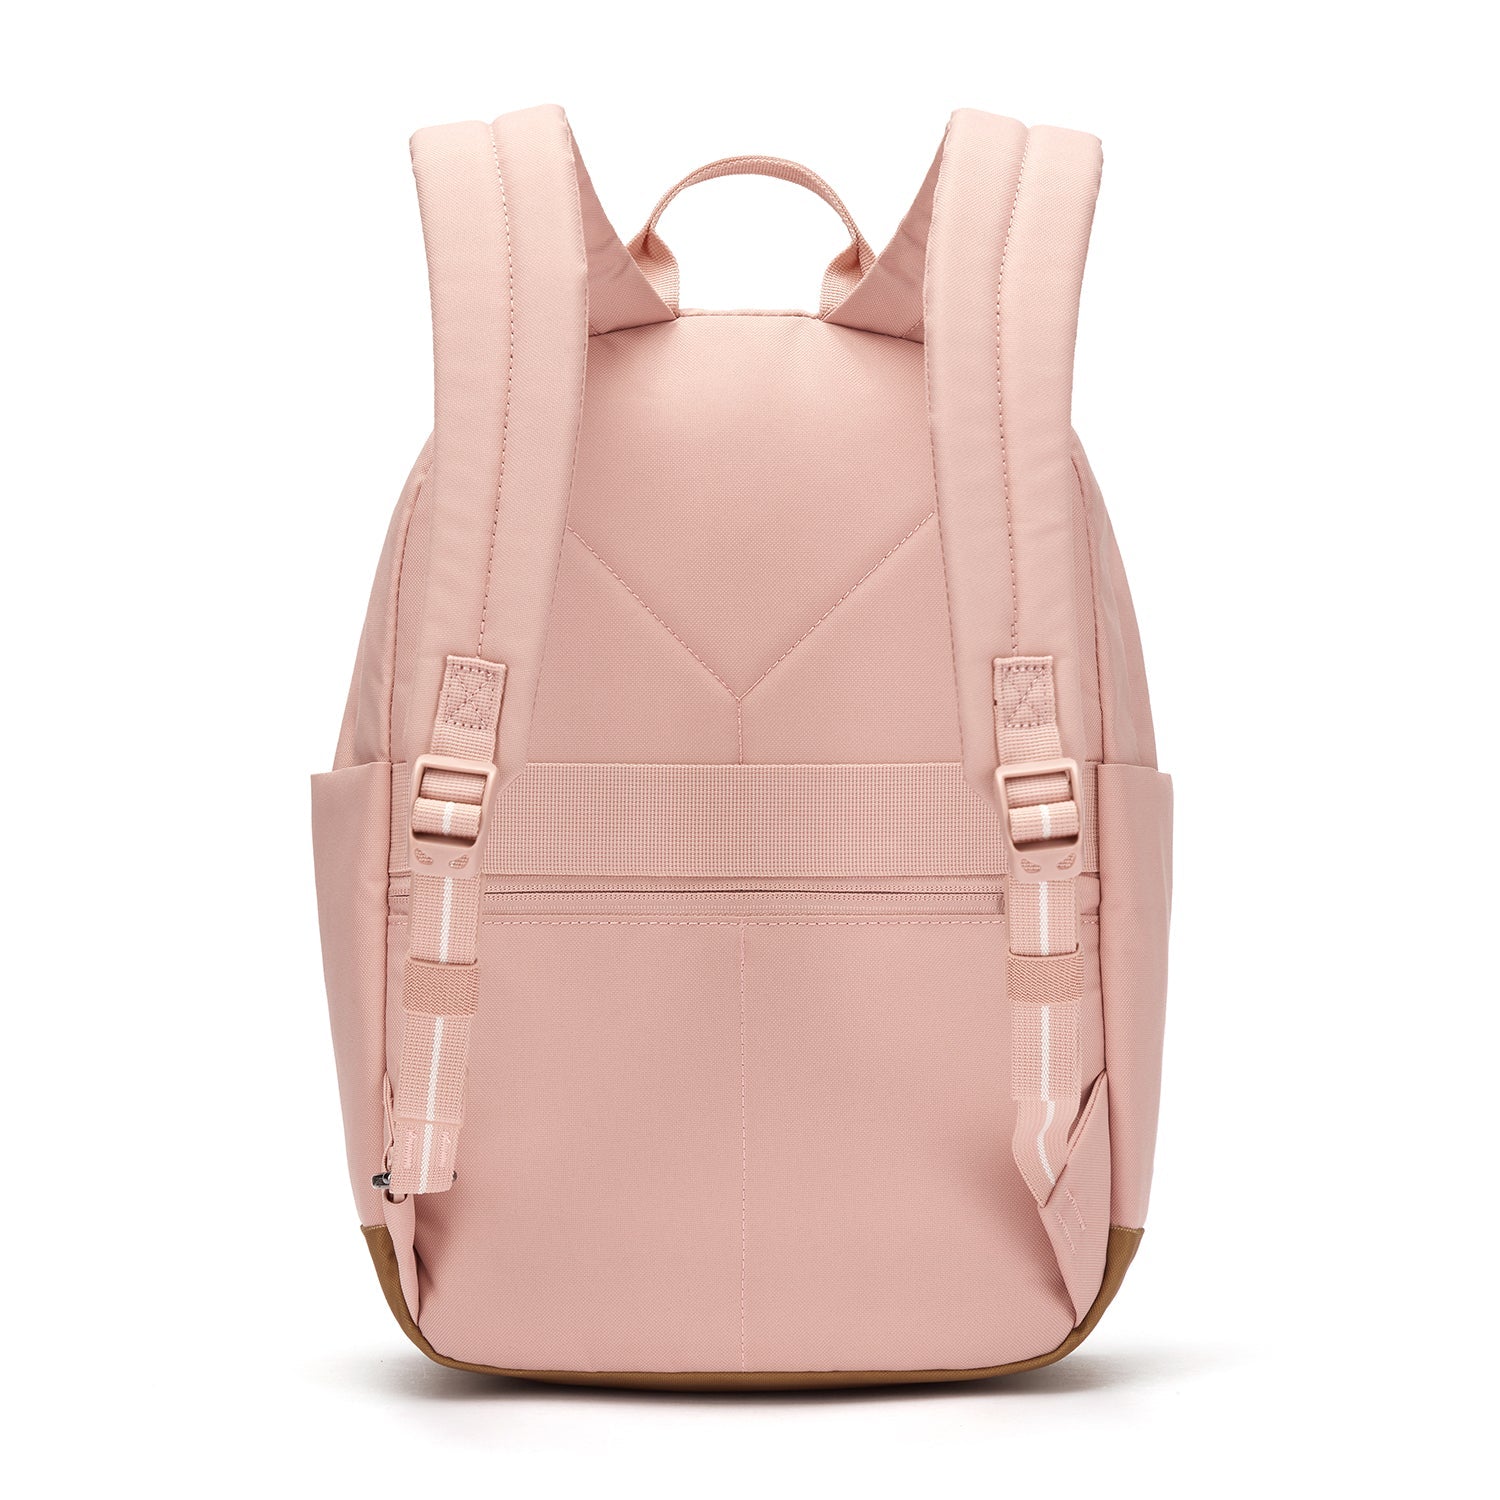 The Best Backpacks Under $50 - The Mom Edit